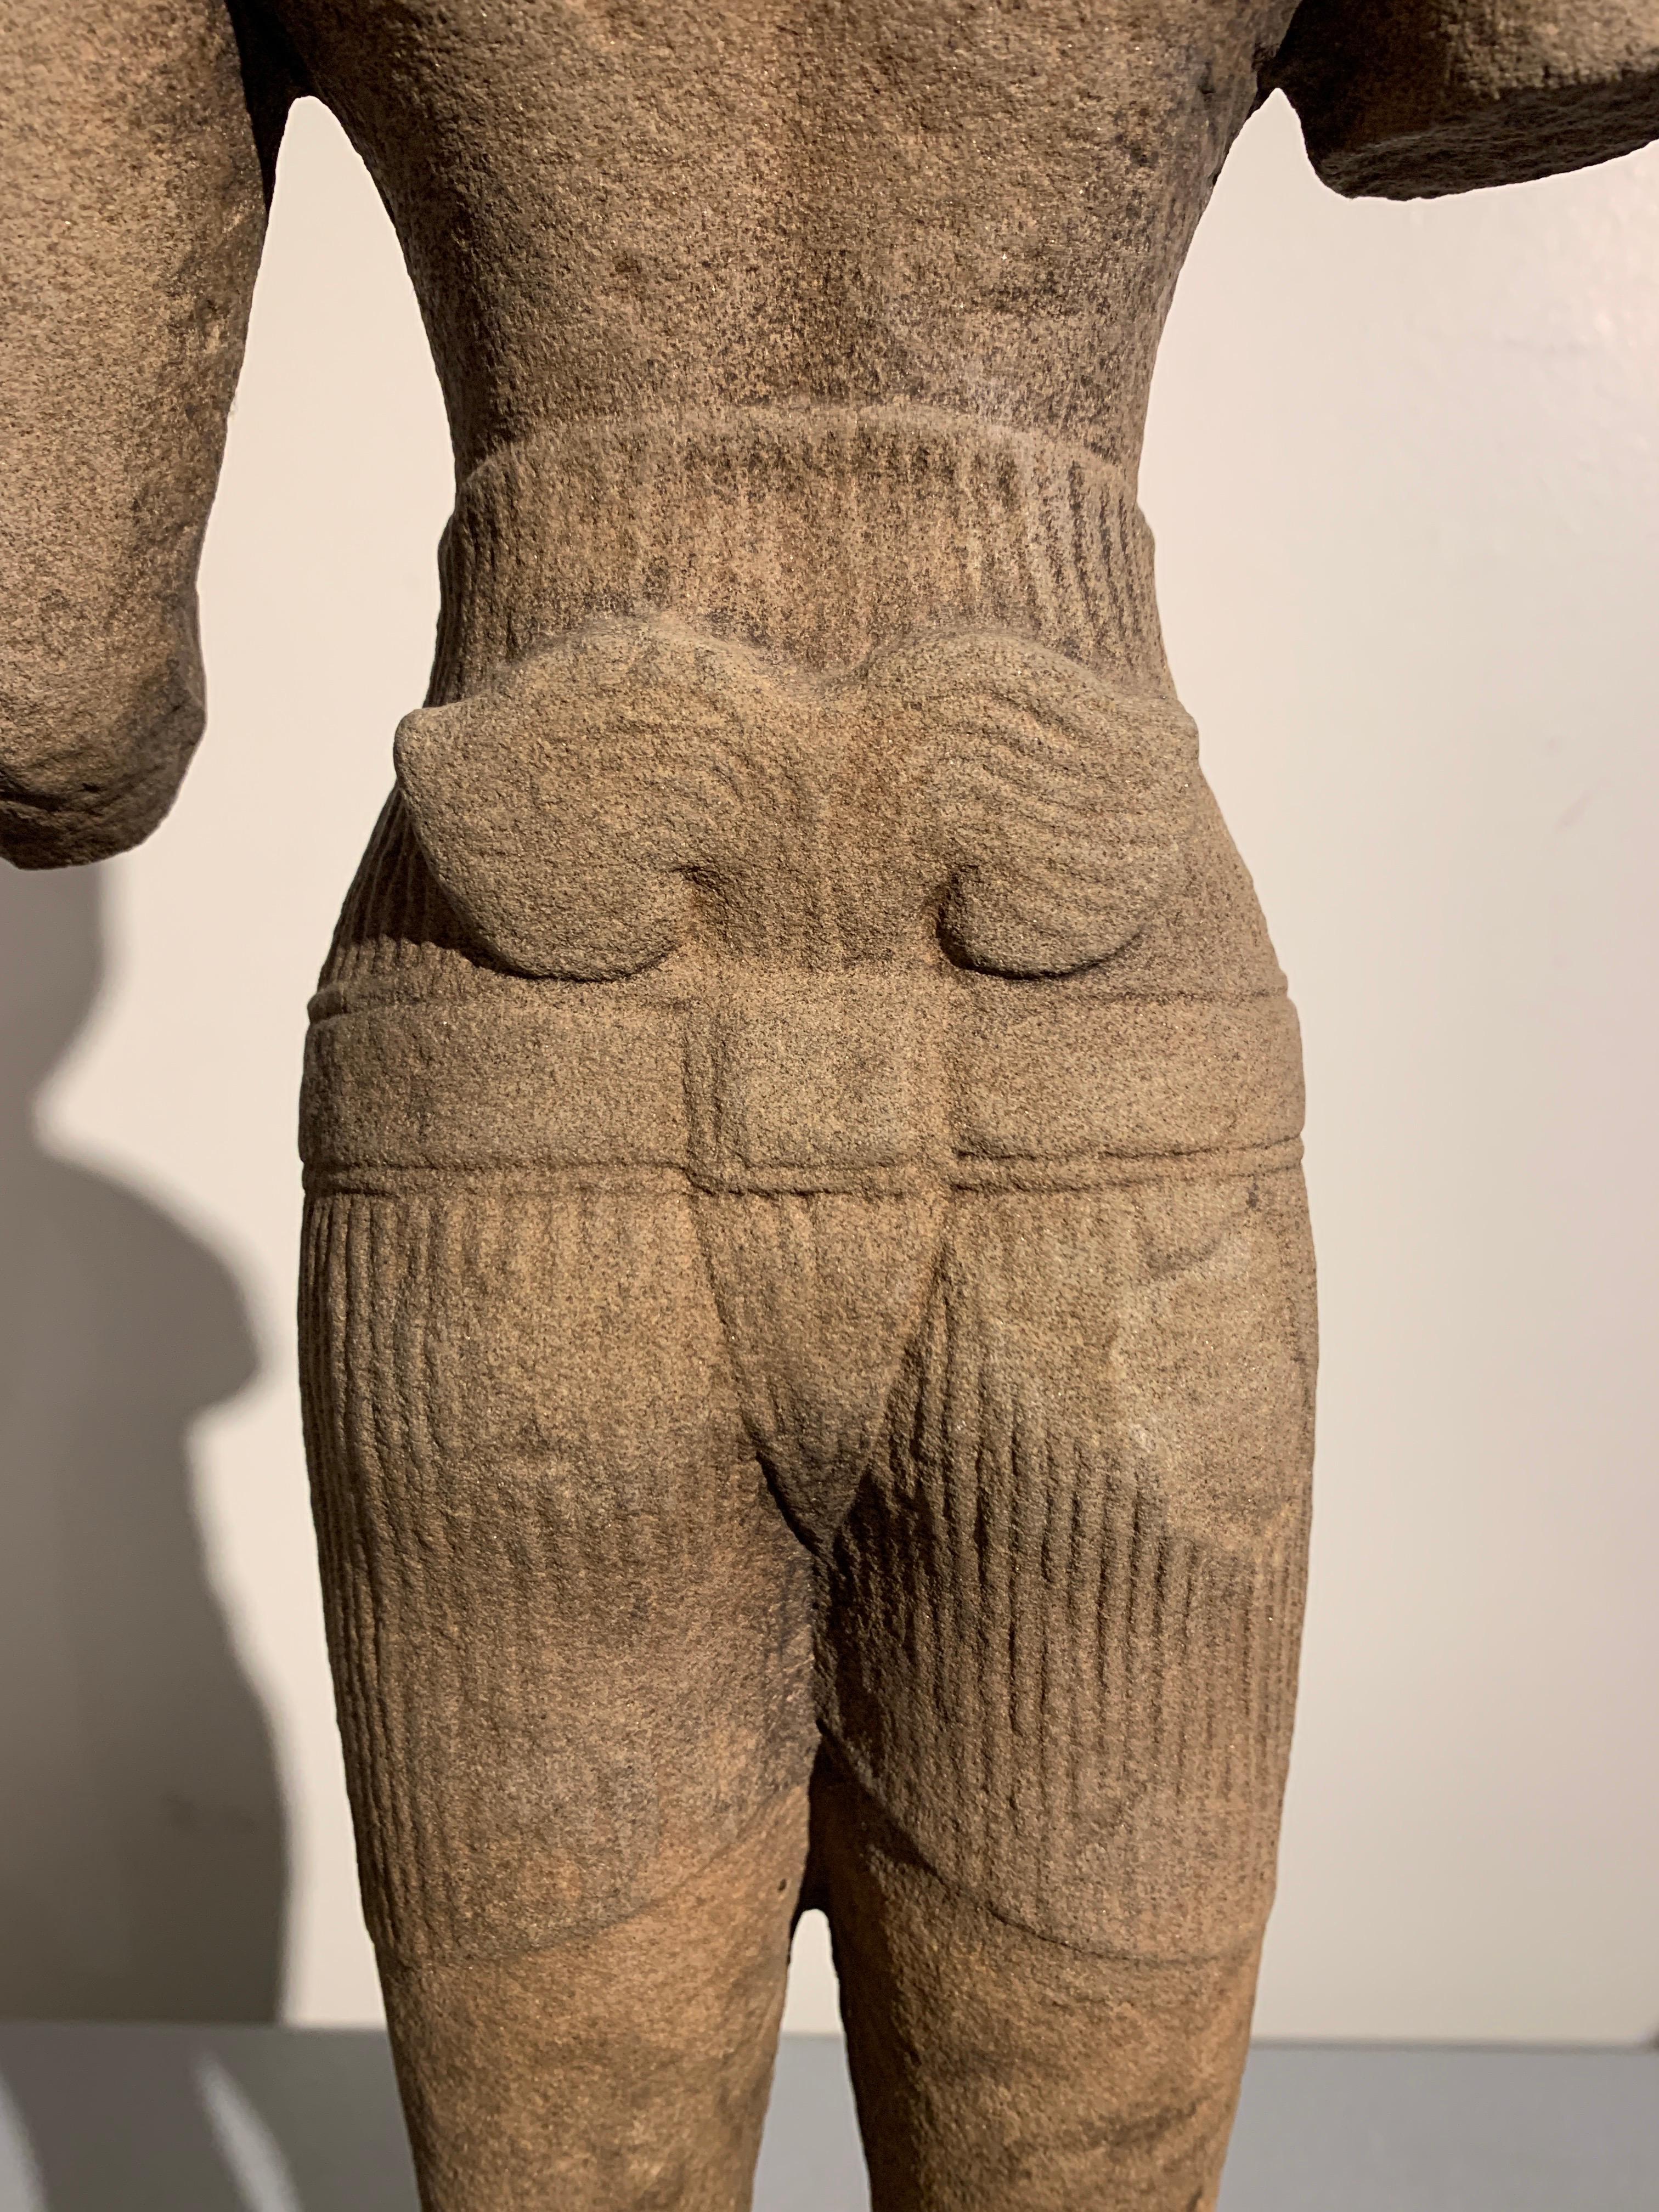 Khmer Carved Sandstone Male Deity, Style of the Baphoun, 11th Century For Sale 2